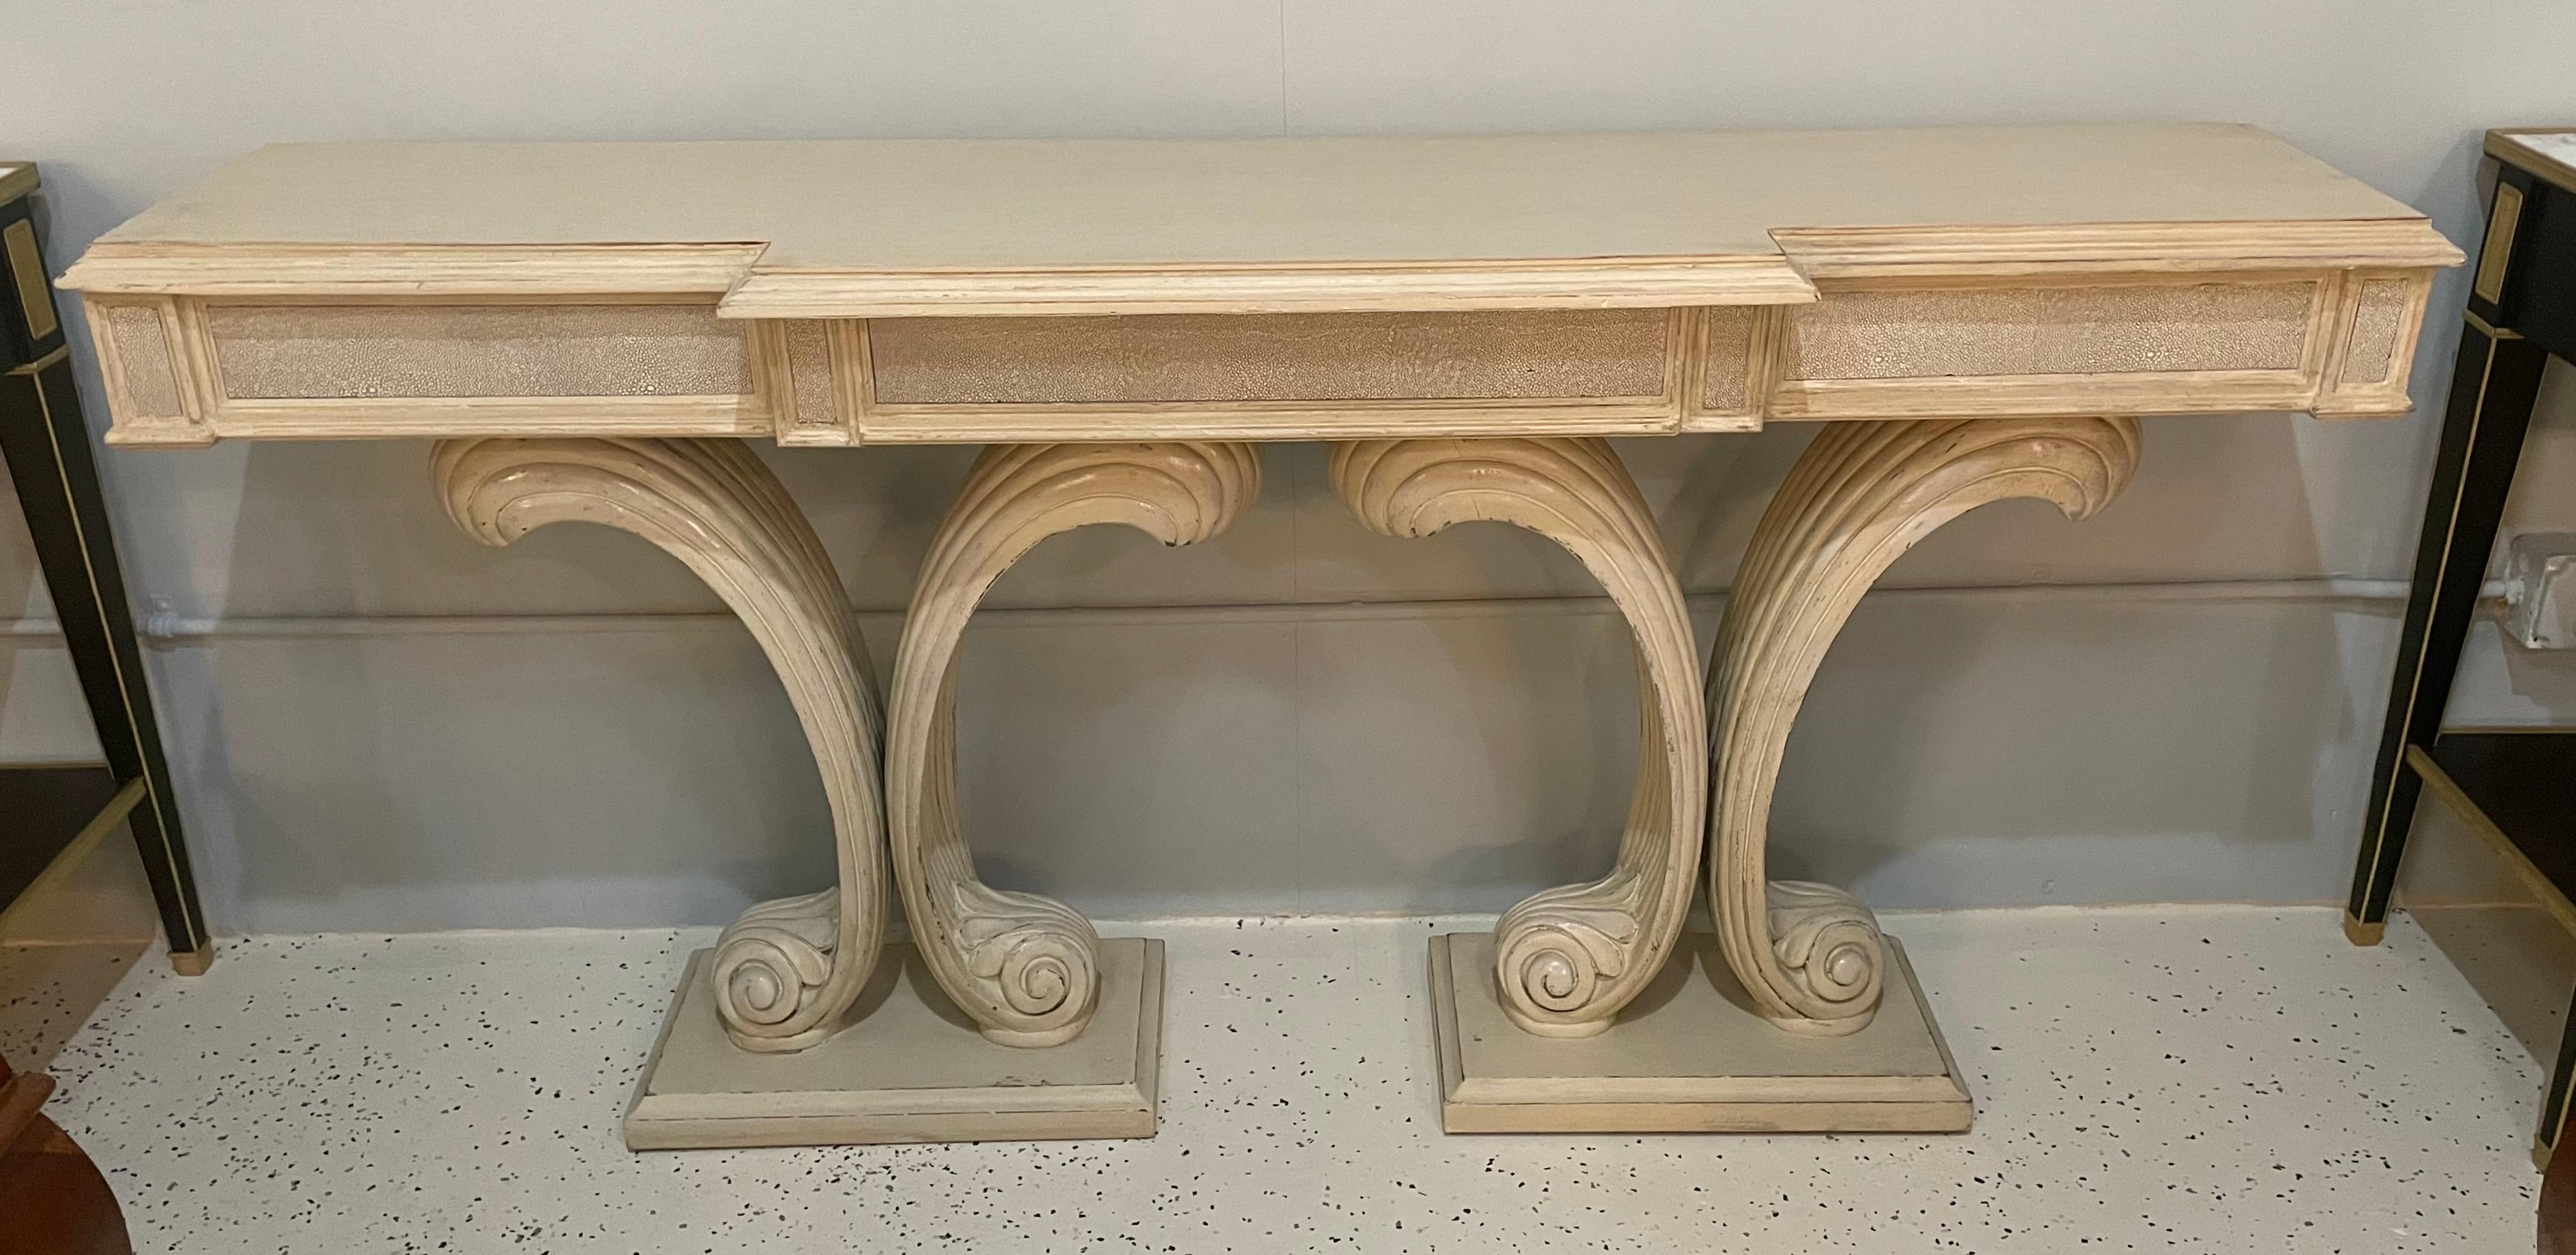 A Hollywood Regency Fleur de Lis double pedestal console table. Distressed paint decorated finish. Jansen style console. Carved wood.
SXA.